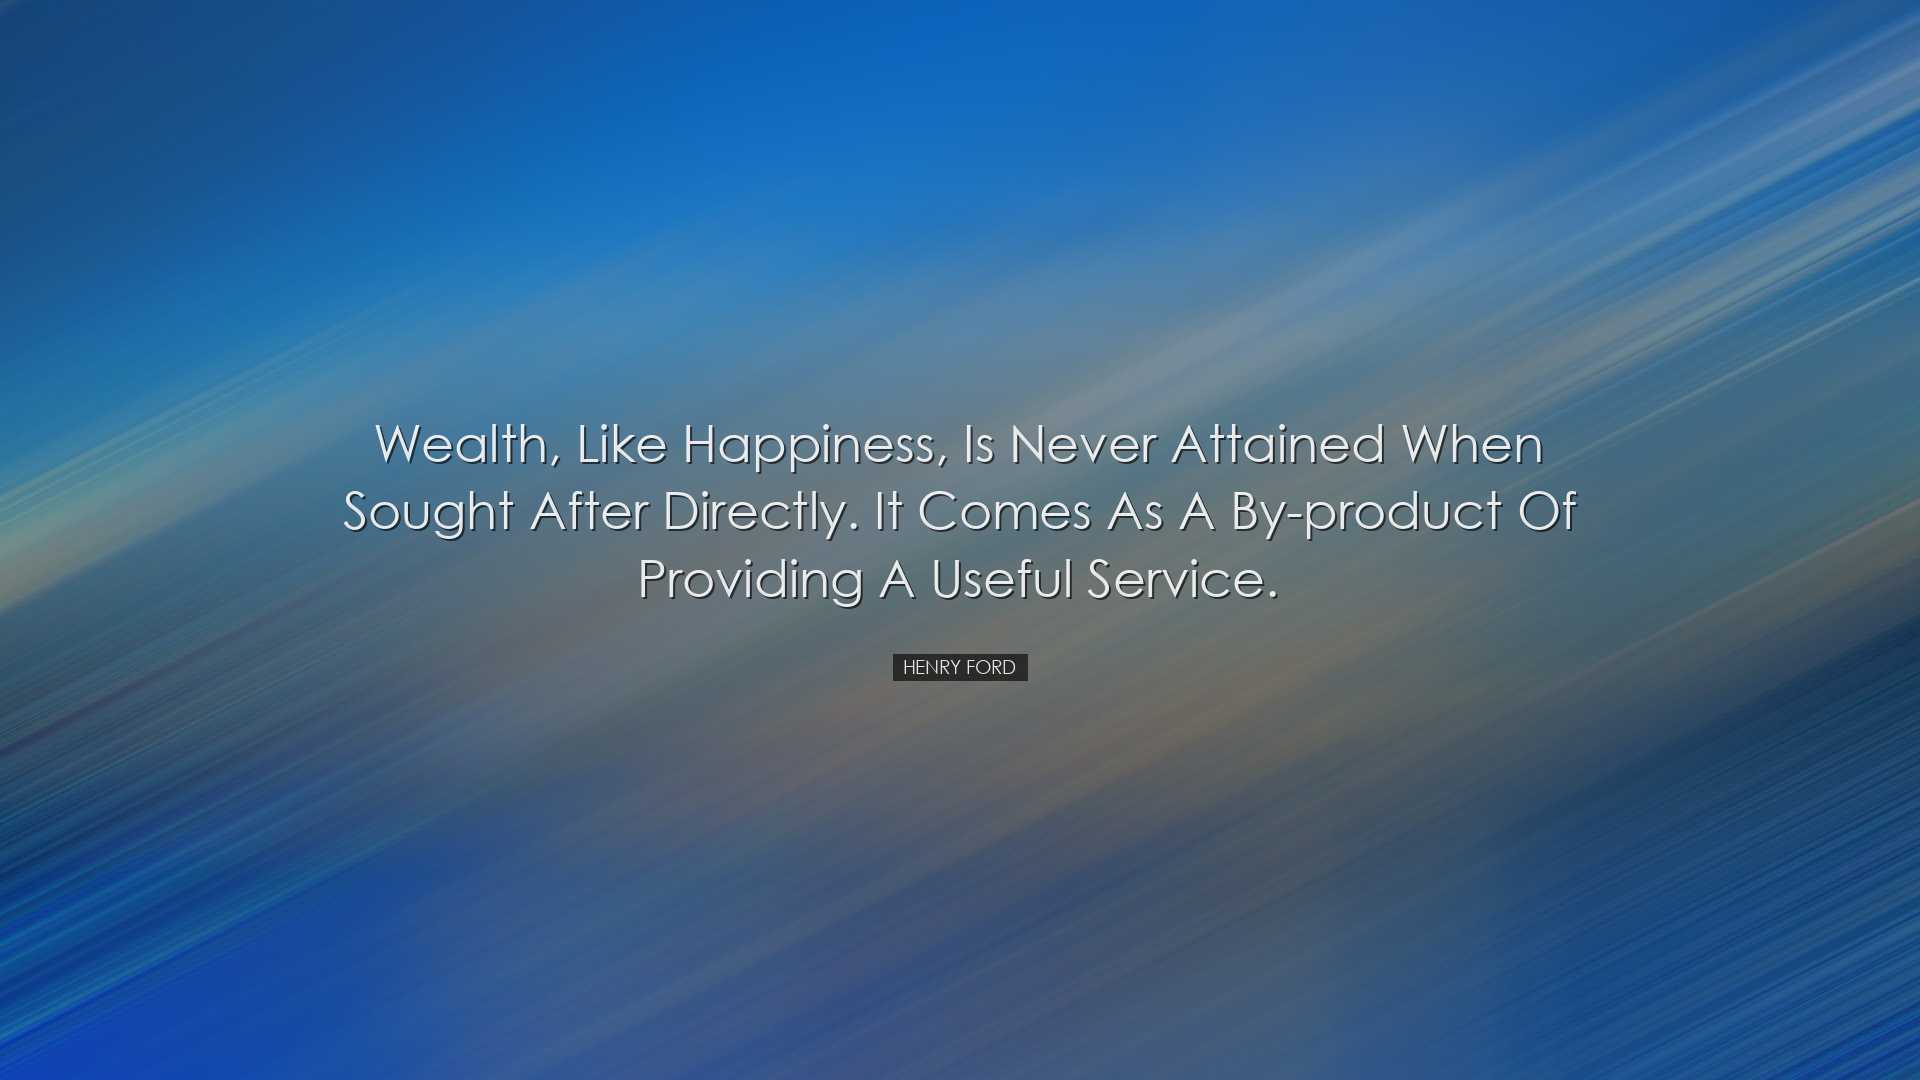 Wealth, like happiness, is never attained when sought after direct